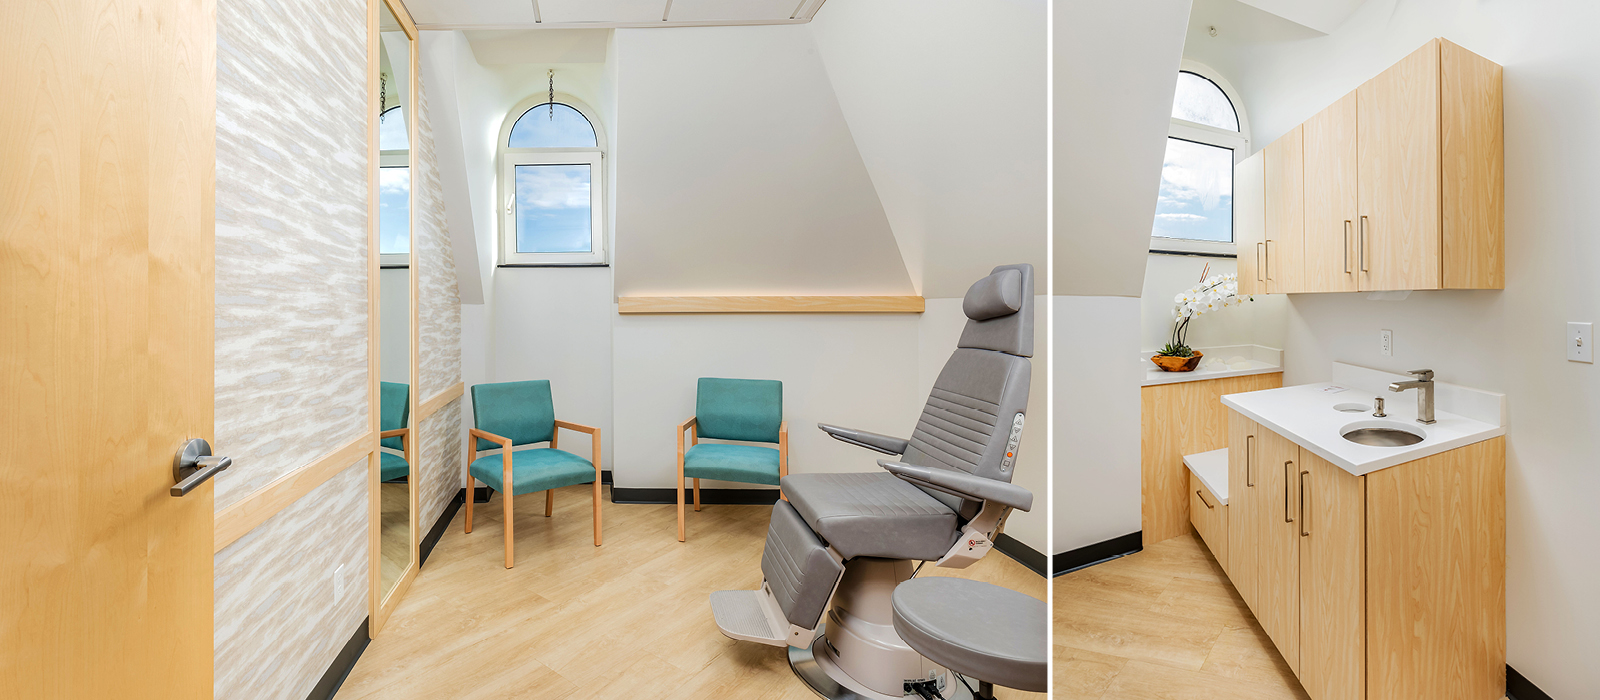 Clareo Centers For Aesthetic Surgery examination room